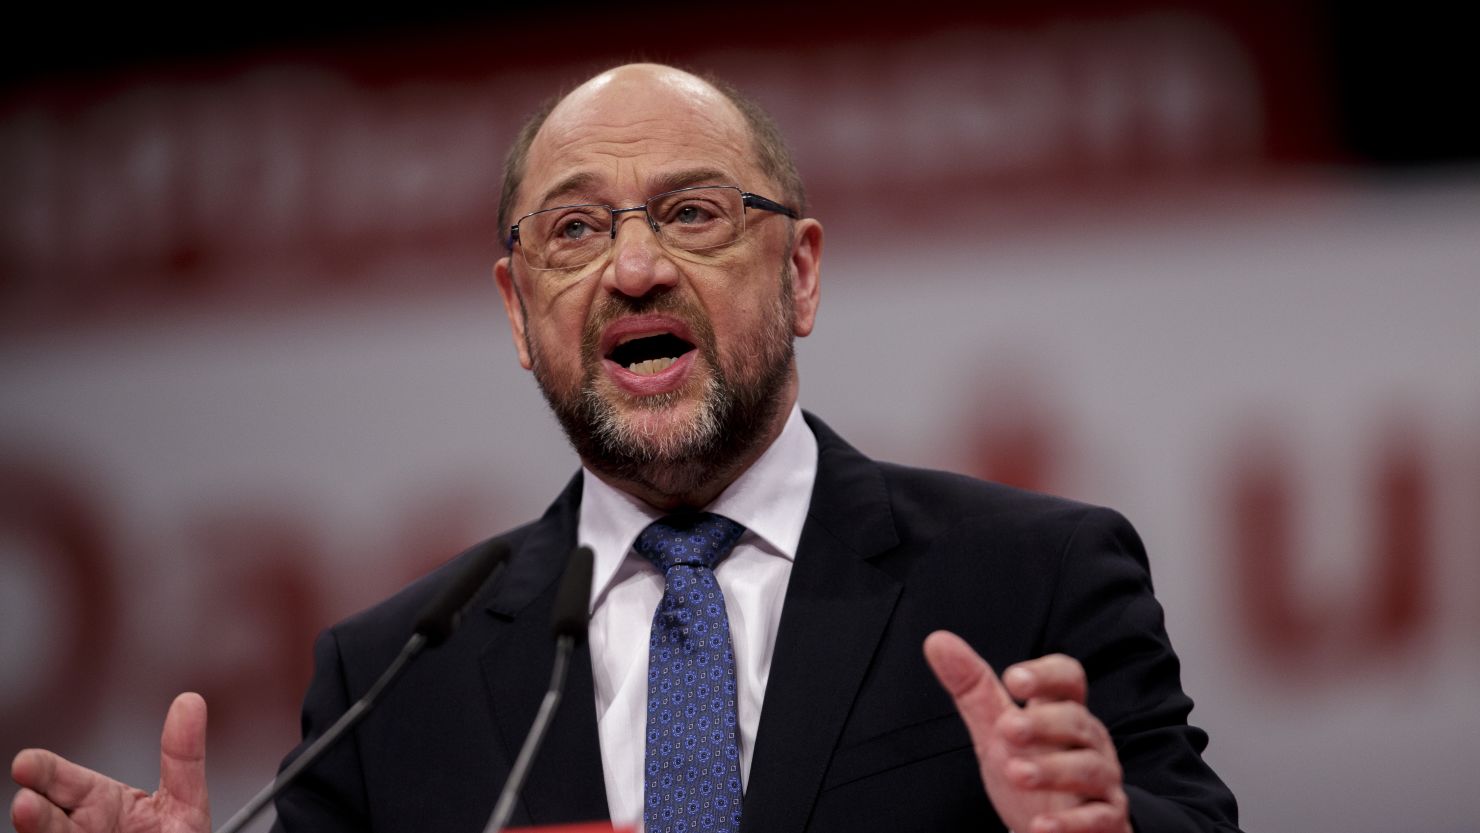 Martin Schulz, leader of Germany's Social Democrats, speaking to party delegates in Berlin on Thursday